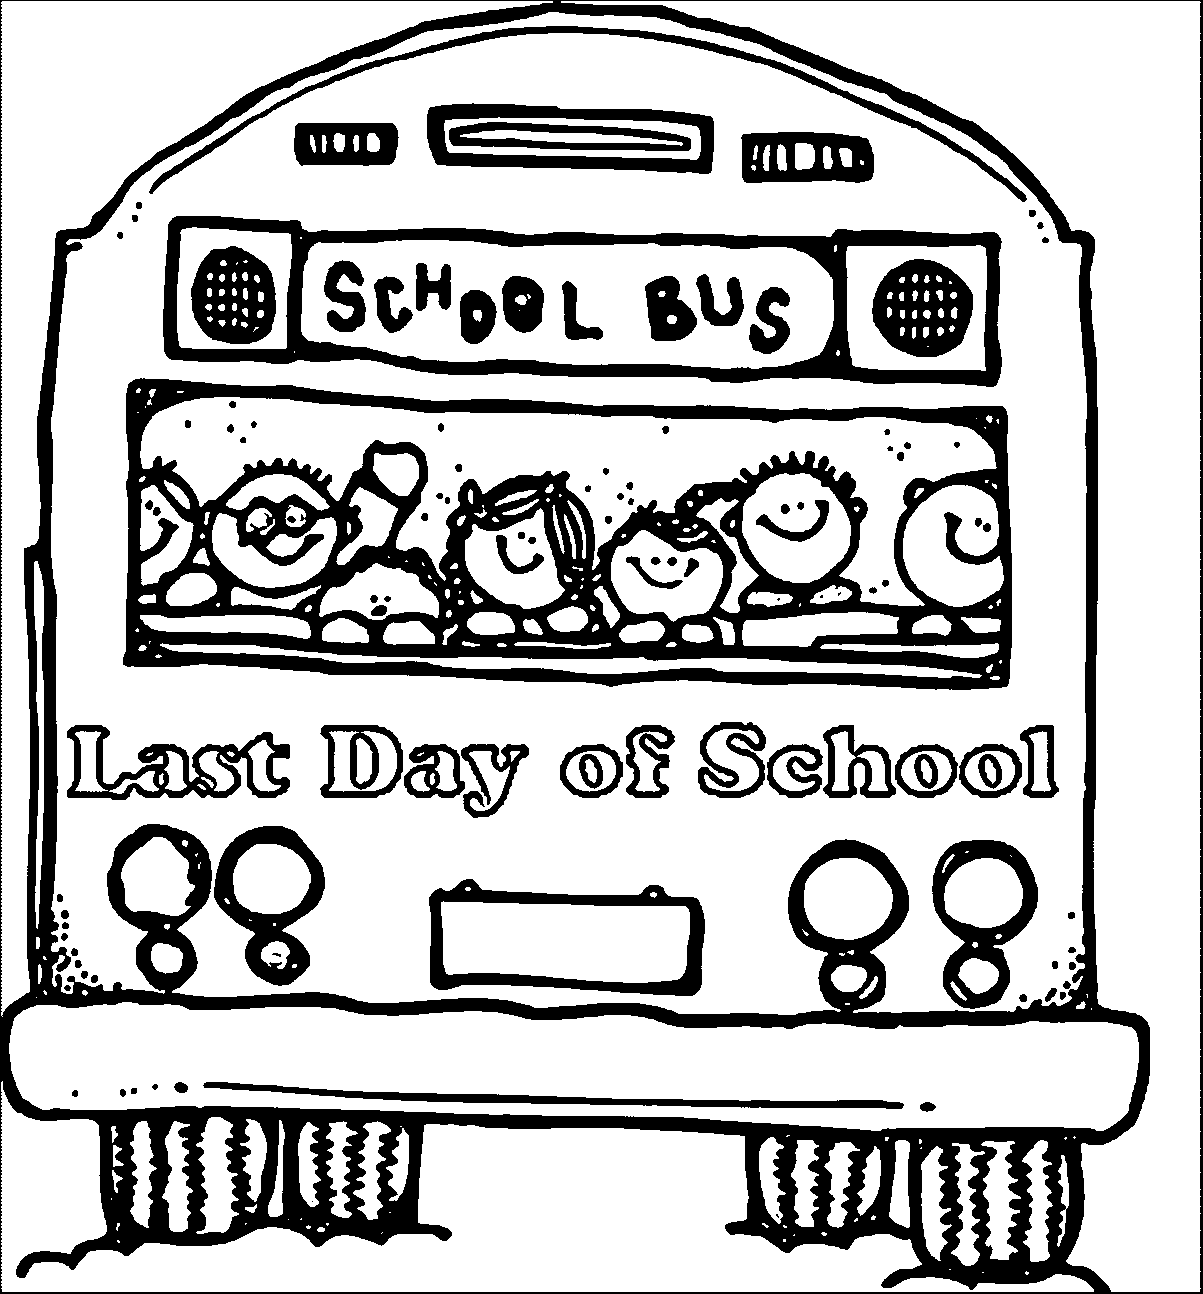 Hudtopics: Last Day Of School Coloring Pages